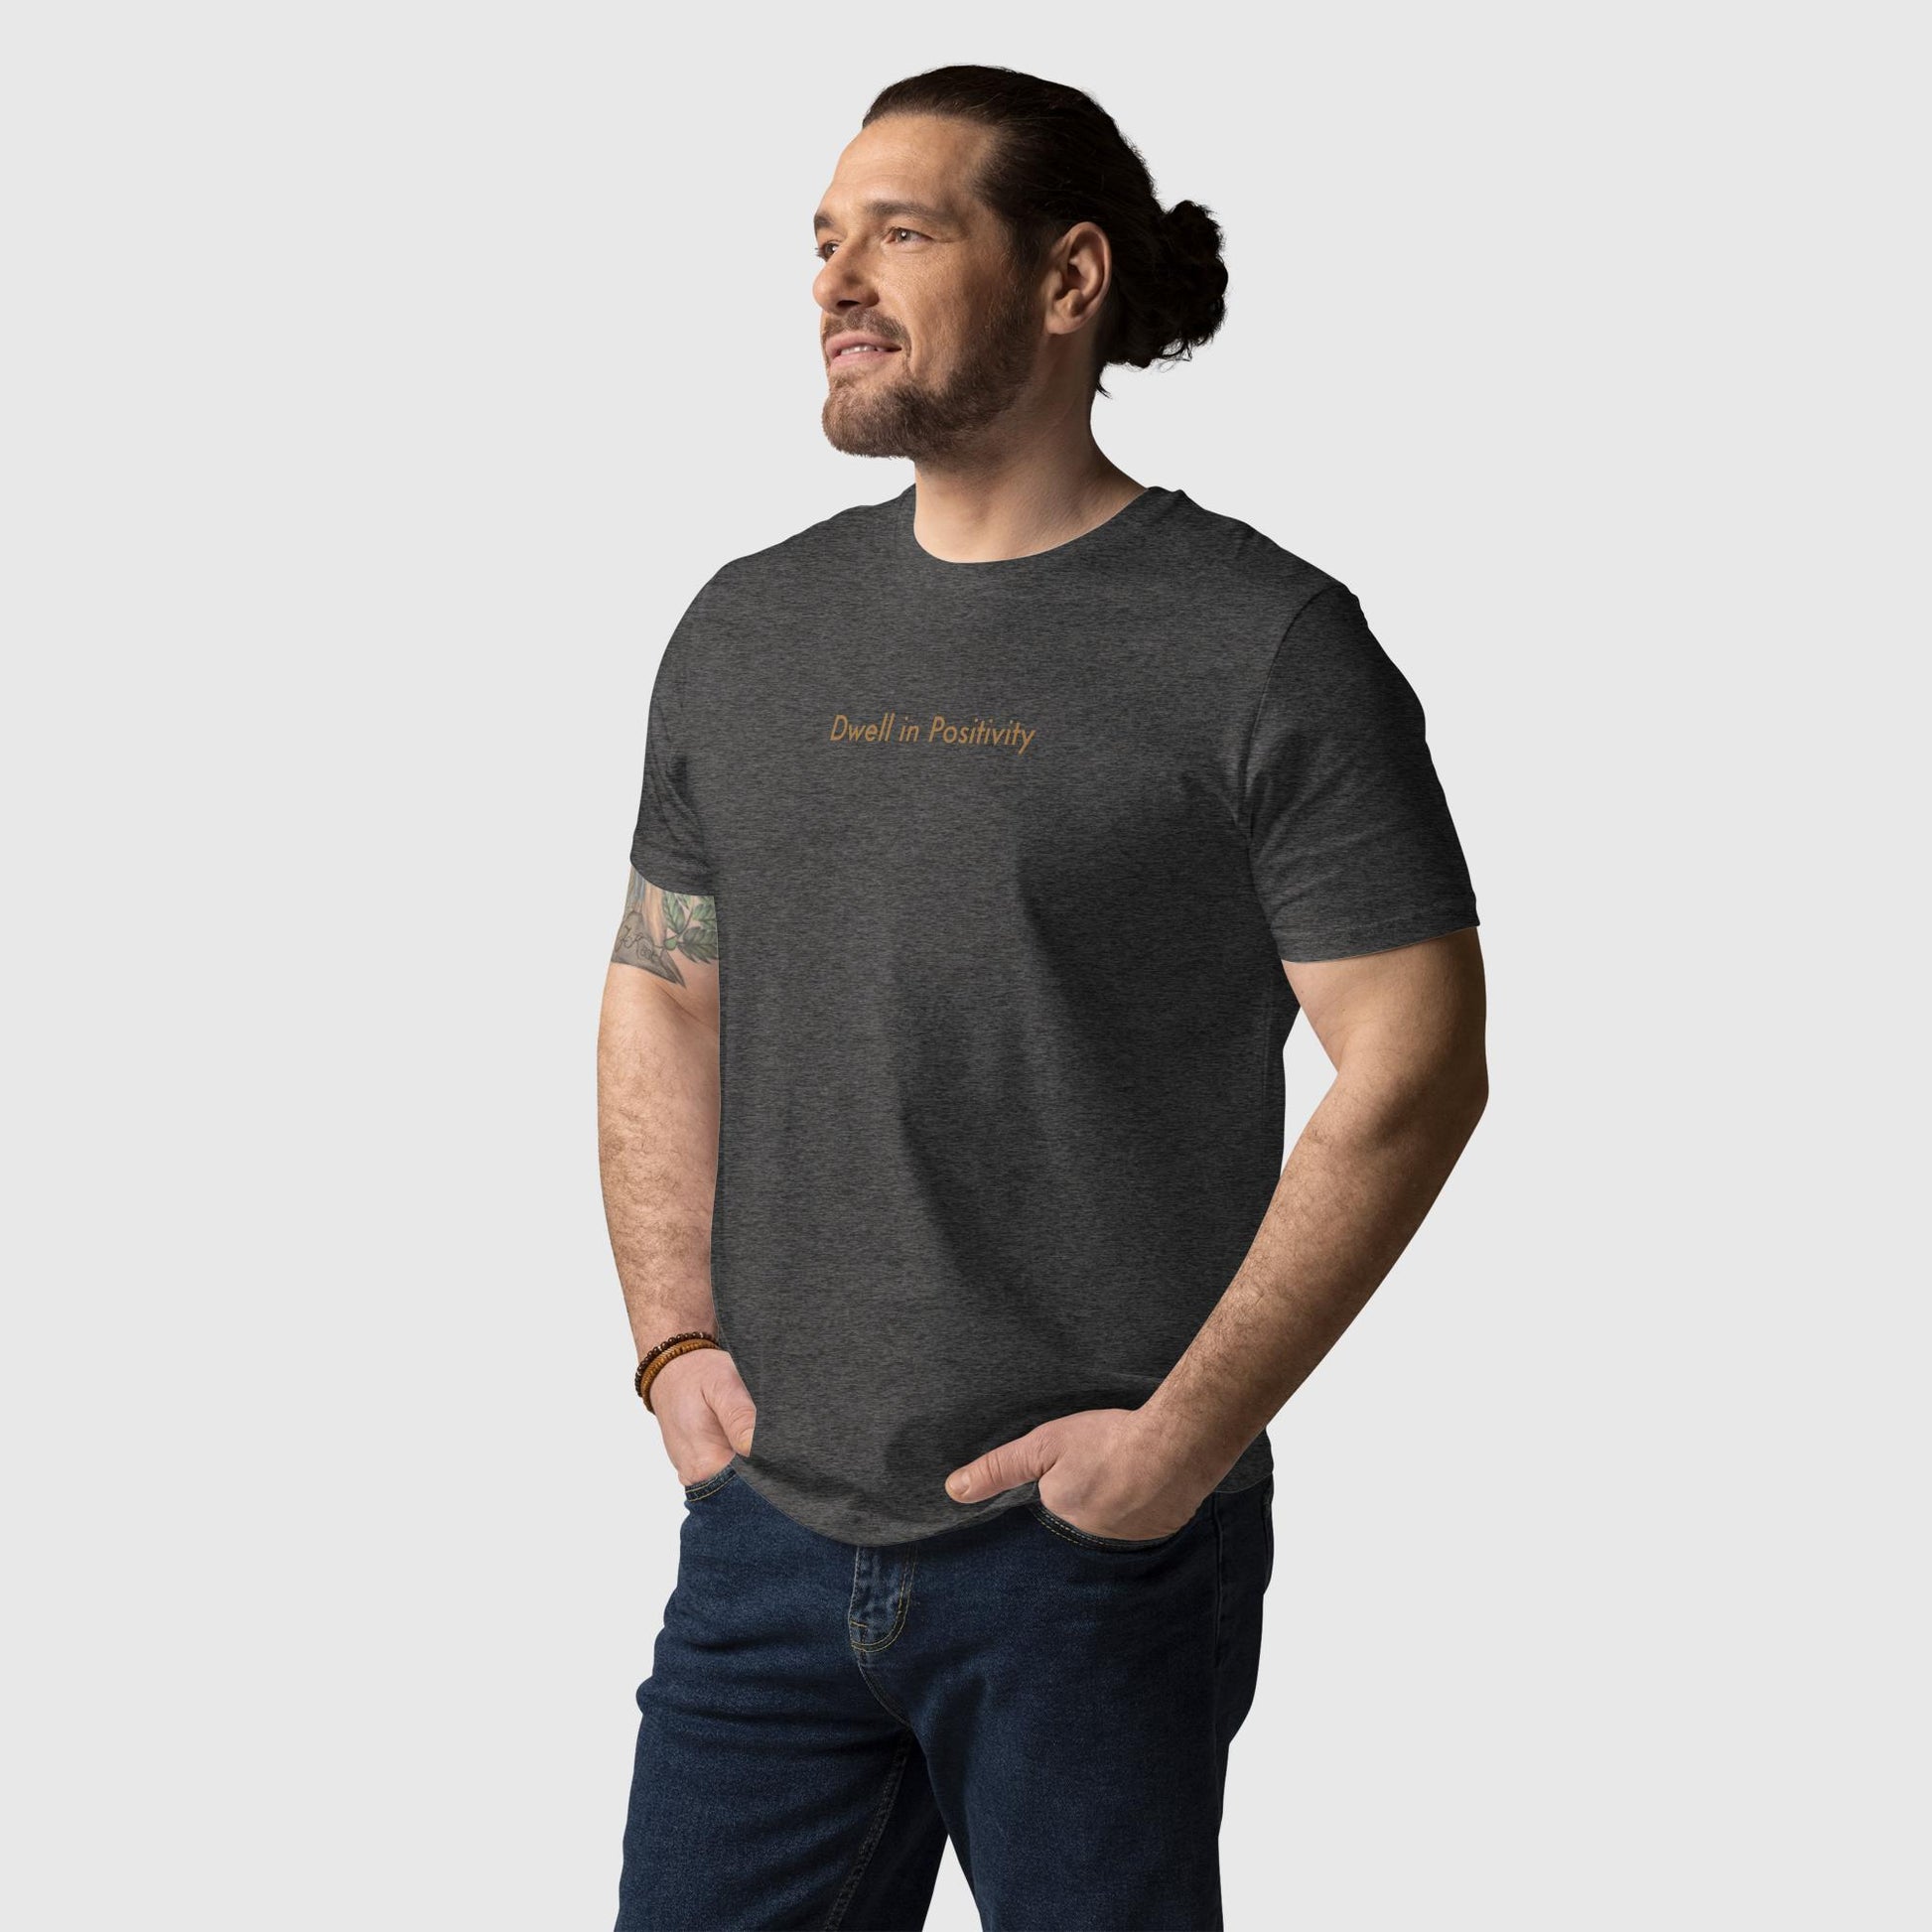 Men's dark heather gray organic cotton t-shirt that features Emily Dickinson's quote, "I dwell in positivity."